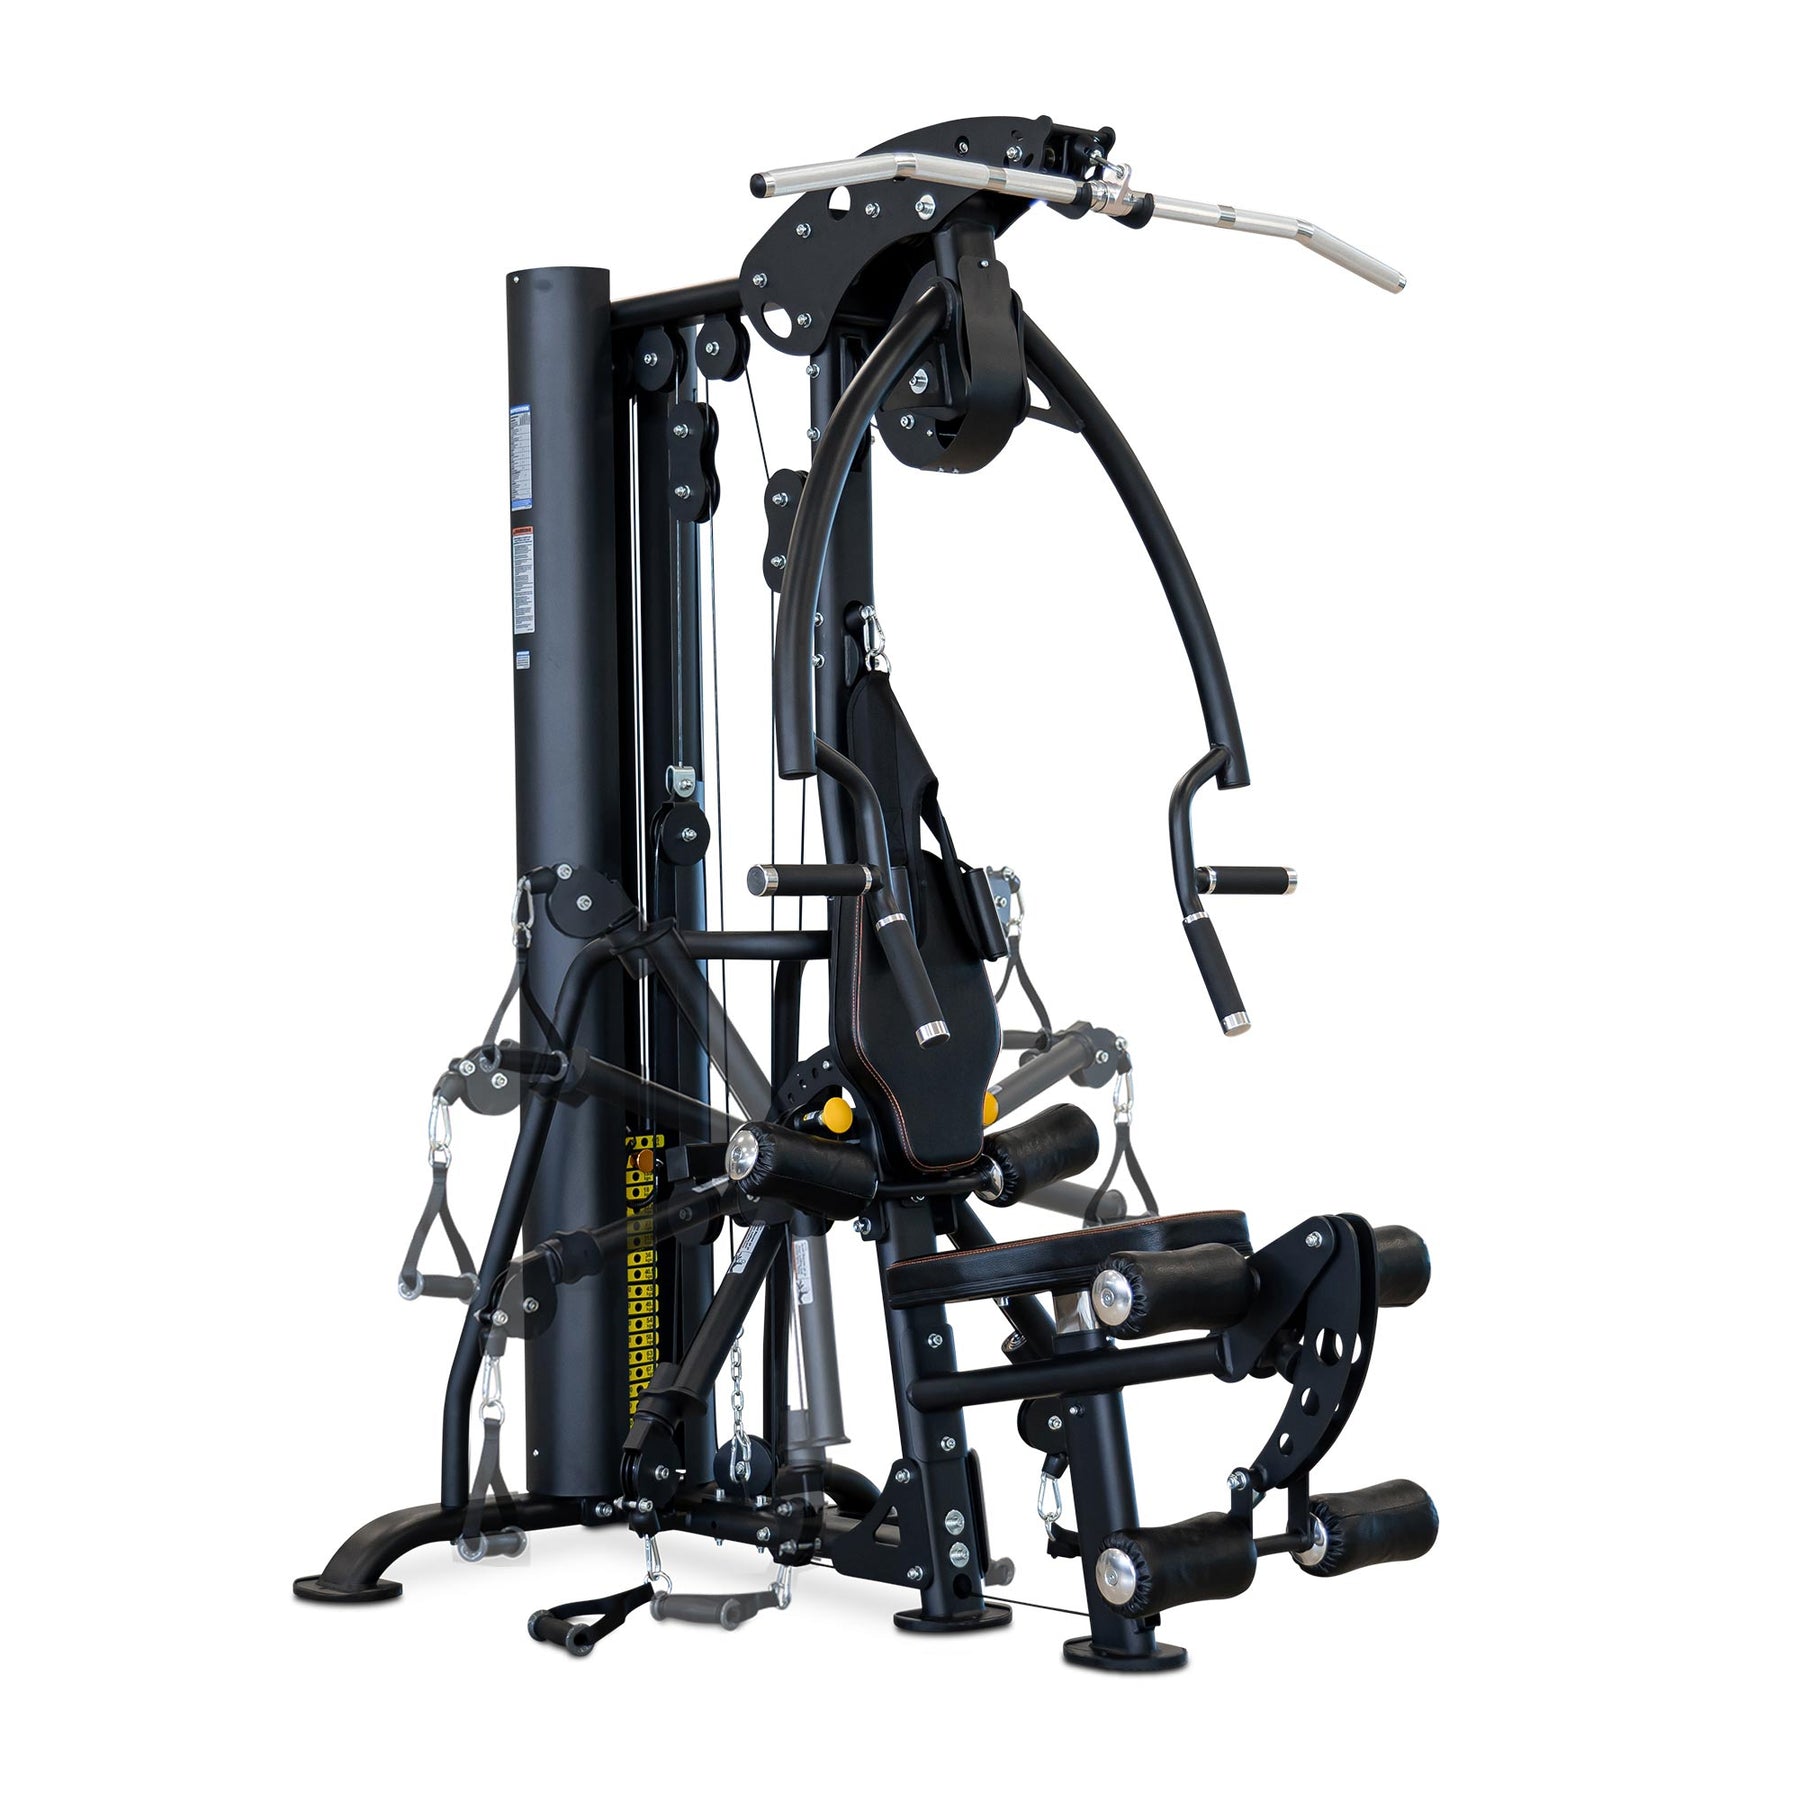 Reeplex Commercial Multi Gym adjustable cable arms